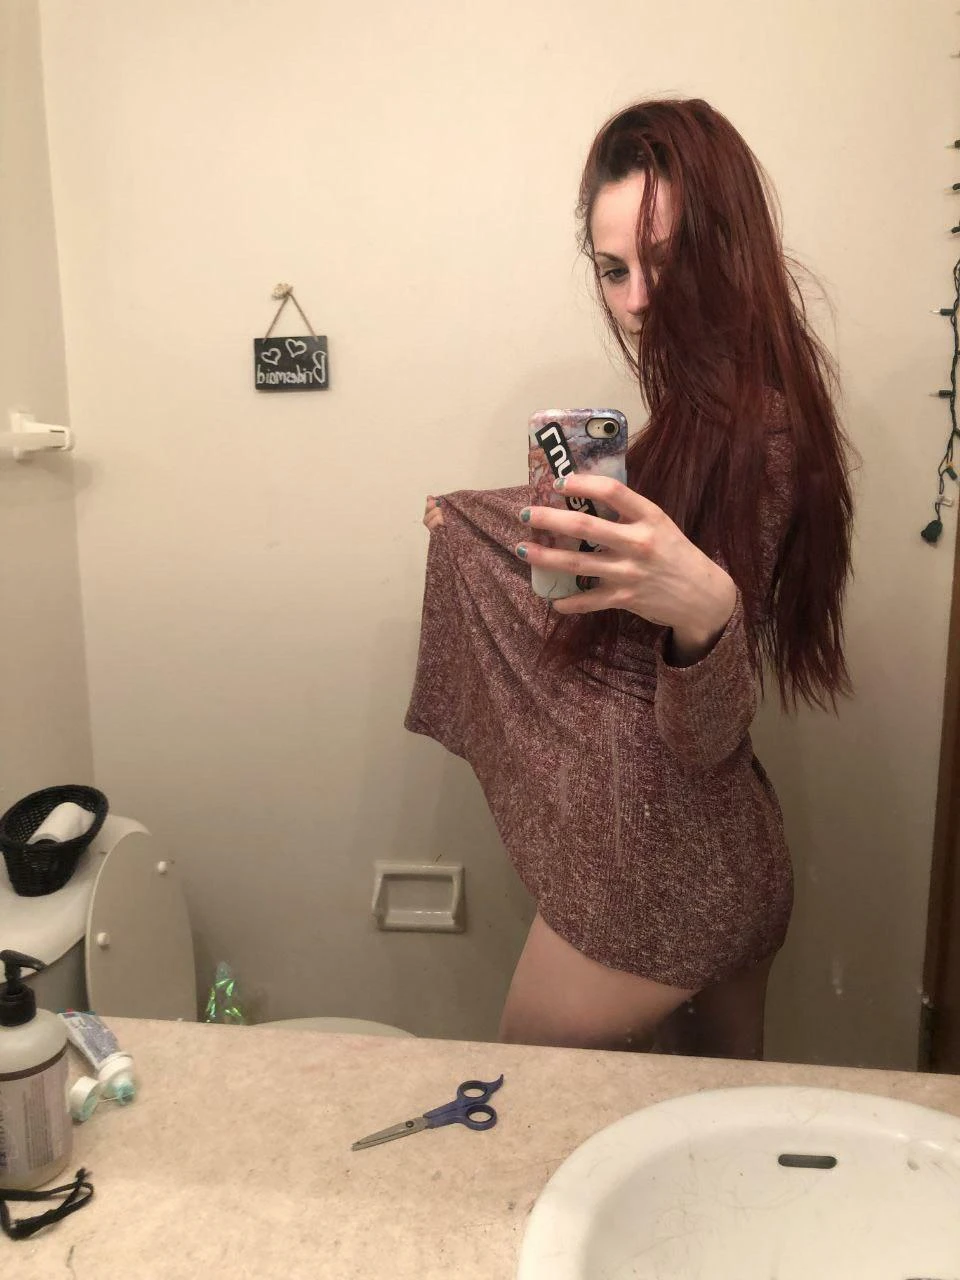 S n a p scarlet_thom44 if you want to be my cucky slave First like gets a little reward ???